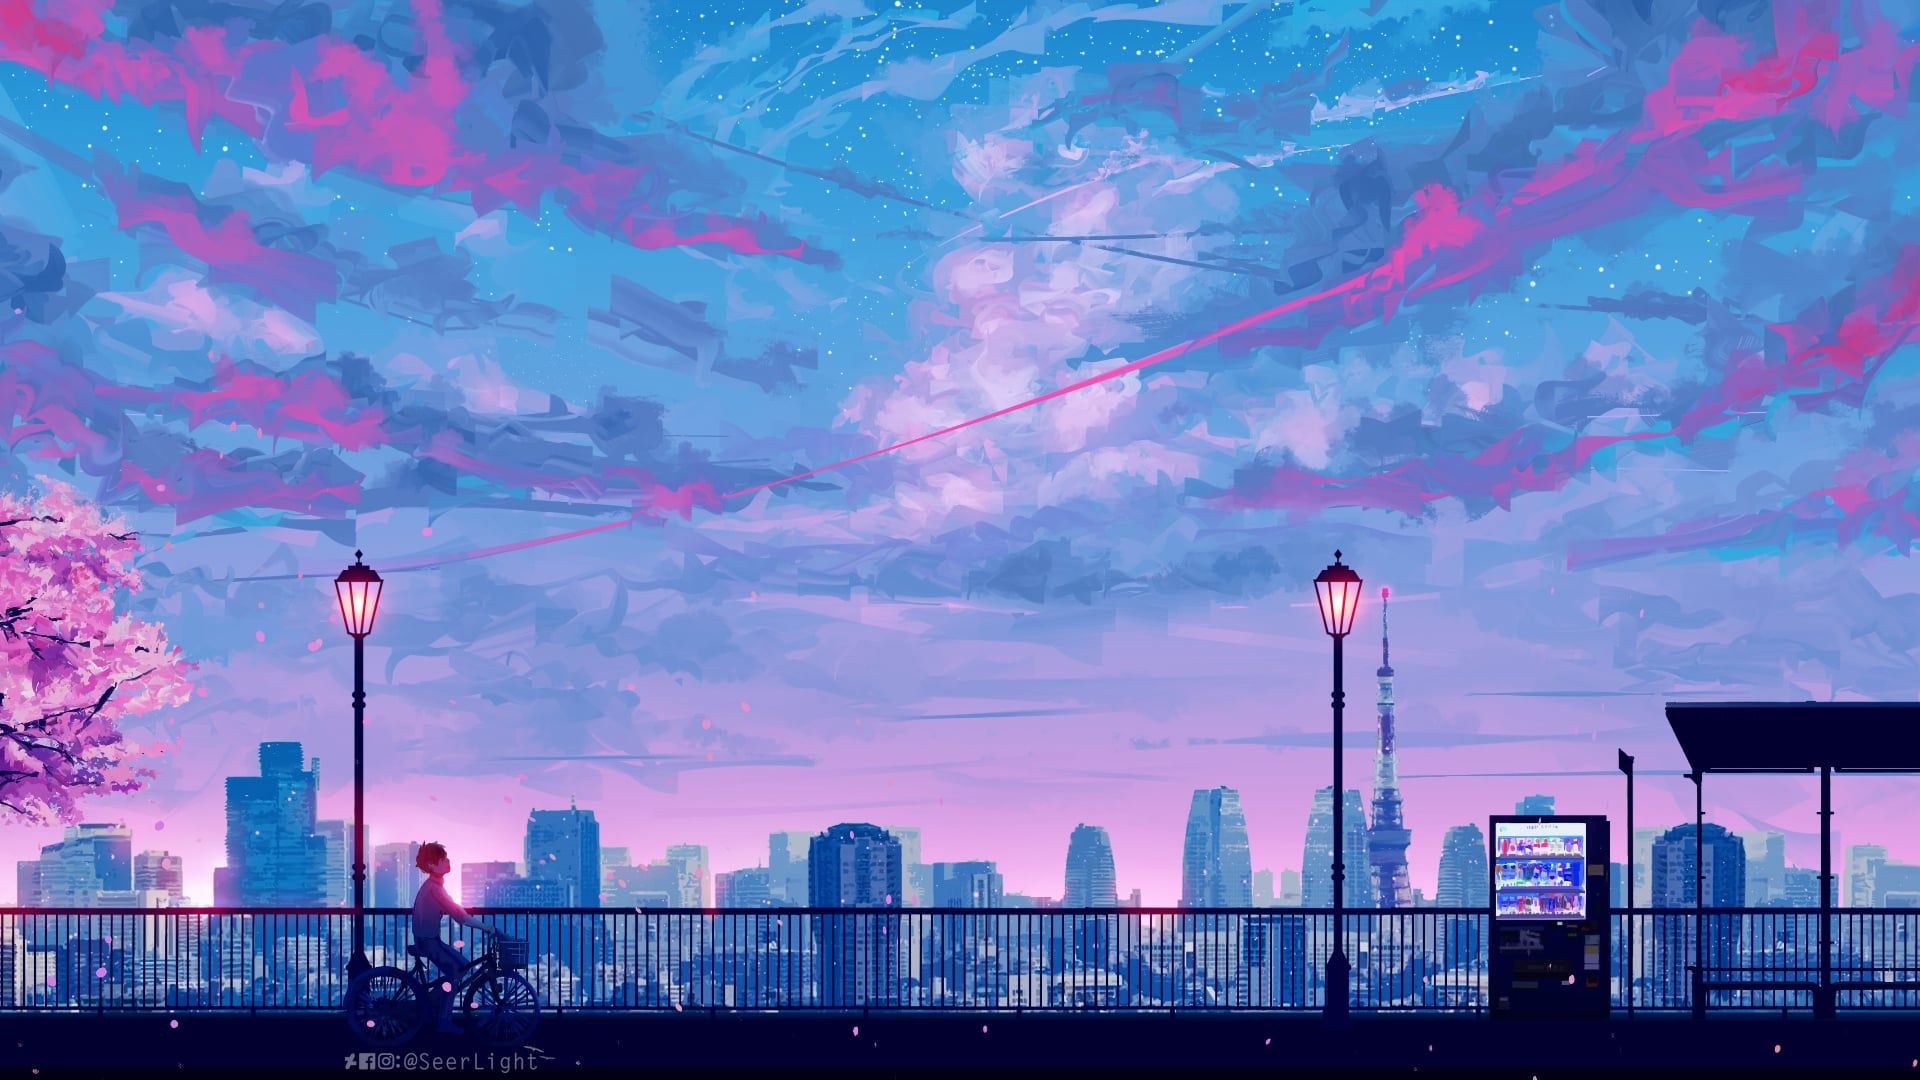 Aesthetic anime city wallpaper with a man sitting on a bench - 1920x1080